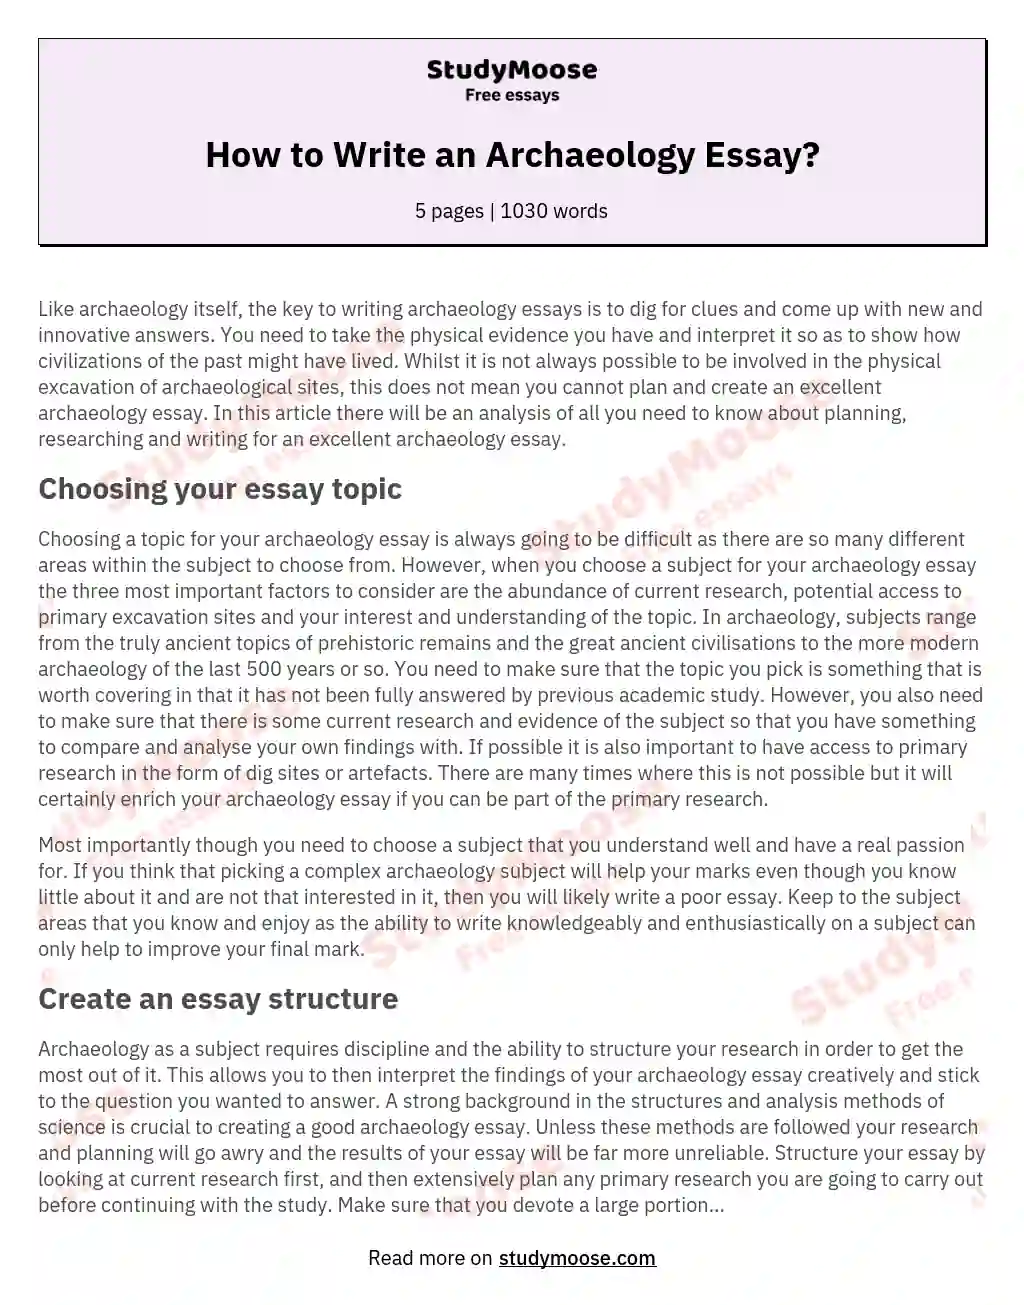 How to Write an Archaeology Essay?